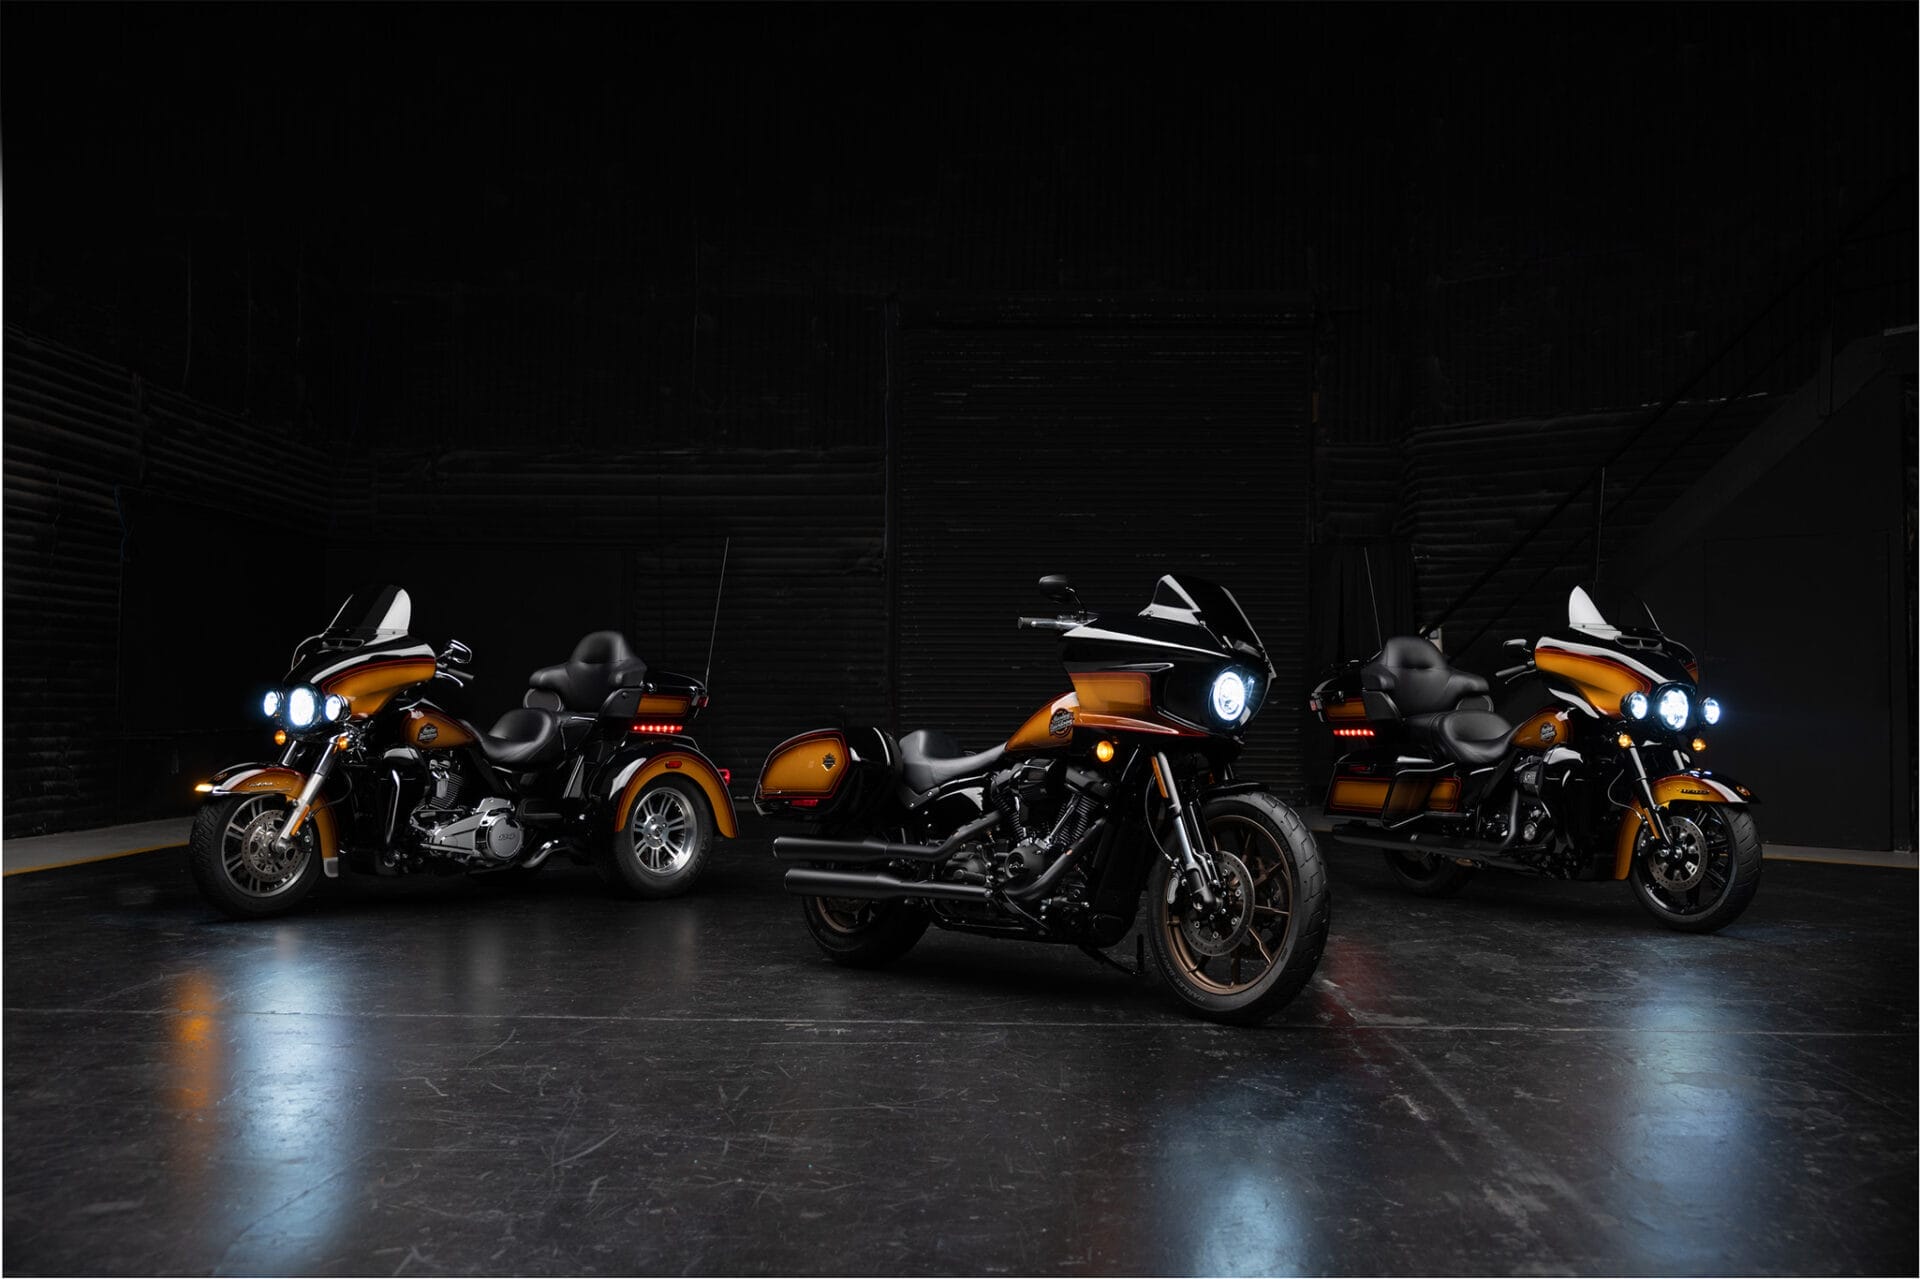 The Tobacco Fade Enthusiast Motorcycle Collection: Harley-Davidson’s tribute to music and freedom